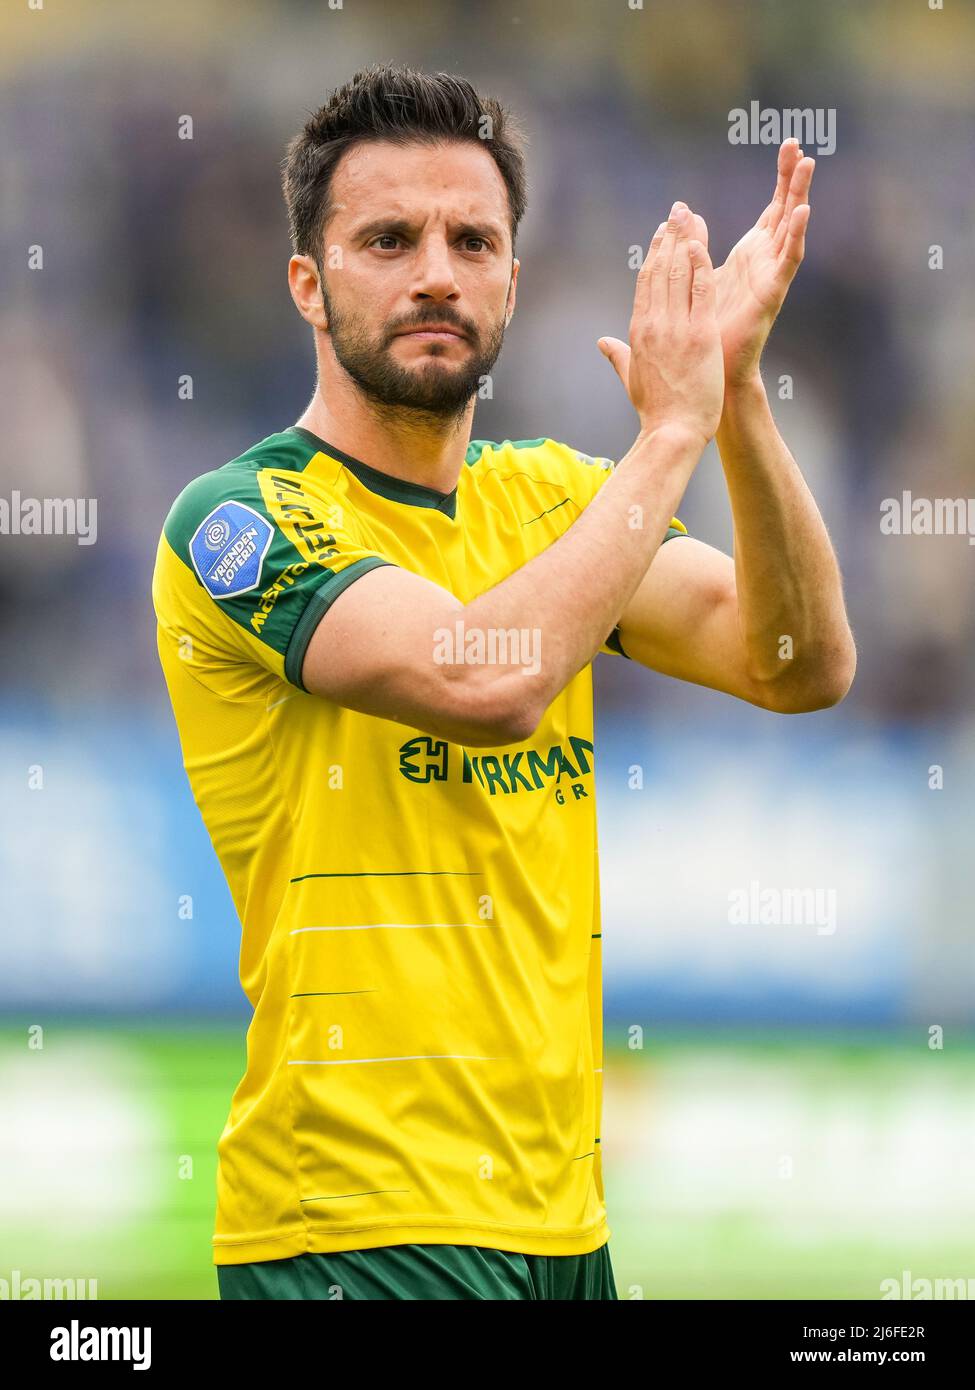 Sittard - Andreas Samaris of Fortuna Sittard during the match between Fortuna Sittard v Feyenoord at Fortuna Sittard Stadion on 1 May 2022 in Sittard, Netherlands. (Box to Box Pictures/Yannick Verhoeven) Stock Photo